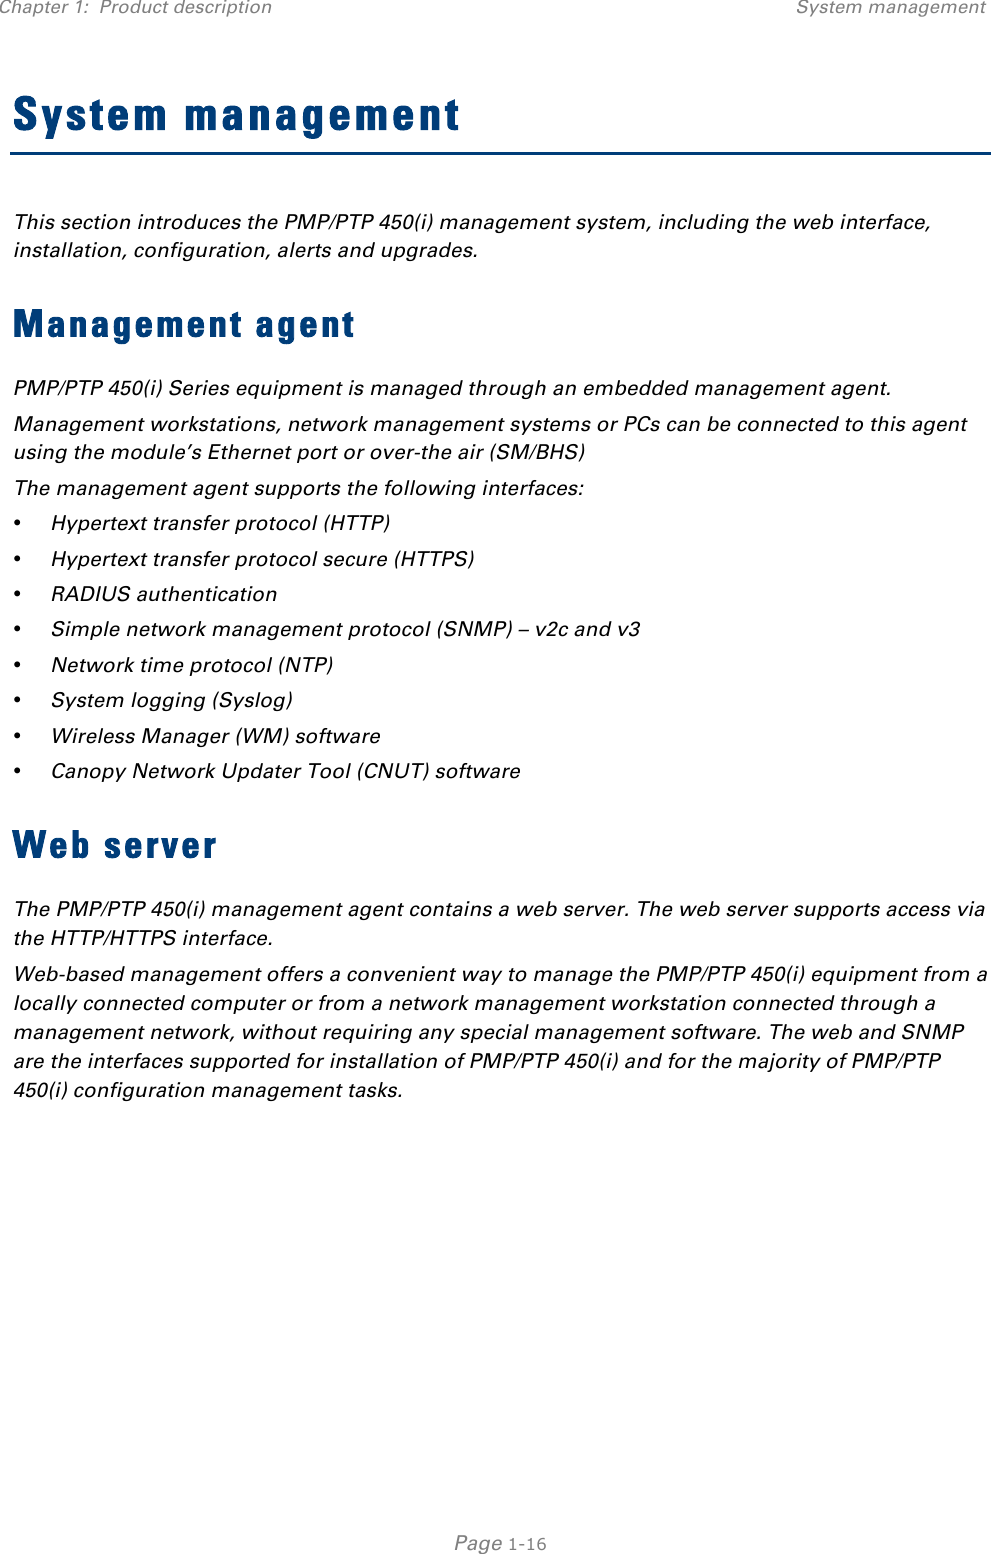 Chapter 1:  Product description System management   Page 1-16 System management This section introduces the PMP/PTP 450(i) management system, including the web interface, installation, configuration, alerts and upgrades. Management agent PMP/PTP 450(i) Series equipment is managed through an embedded management agent.  Management workstations, network management systems or PCs can be connected to this agent using the module’s Ethernet port or over-the air (SM/BHS)  The management agent supports the following interfaces:  • Hypertext transfer protocol (HTTP)  • Hypertext transfer protocol secure (HTTPS) • RADIUS authentication  • Simple network management protocol (SNMP) – v2c and v3 • Network time protocol (NTP)  • System logging (Syslog)  • Wireless Manager (WM) software  • Canopy Network Updater Tool (CNUT) software  Web server The PMP/PTP 450(i) management agent contains a web server. The web server supports access via the HTTP/HTTPS interface. Web-based management offers a convenient way to manage the PMP/PTP 450(i) equipment from a locally connected computer or from a network management workstation connected through a management network, without requiring any special management software. The web and SNMP are the interfaces supported for installation of PMP/PTP 450(i) and for the majority of PMP/PTP 450(i) configuration management tasks.    